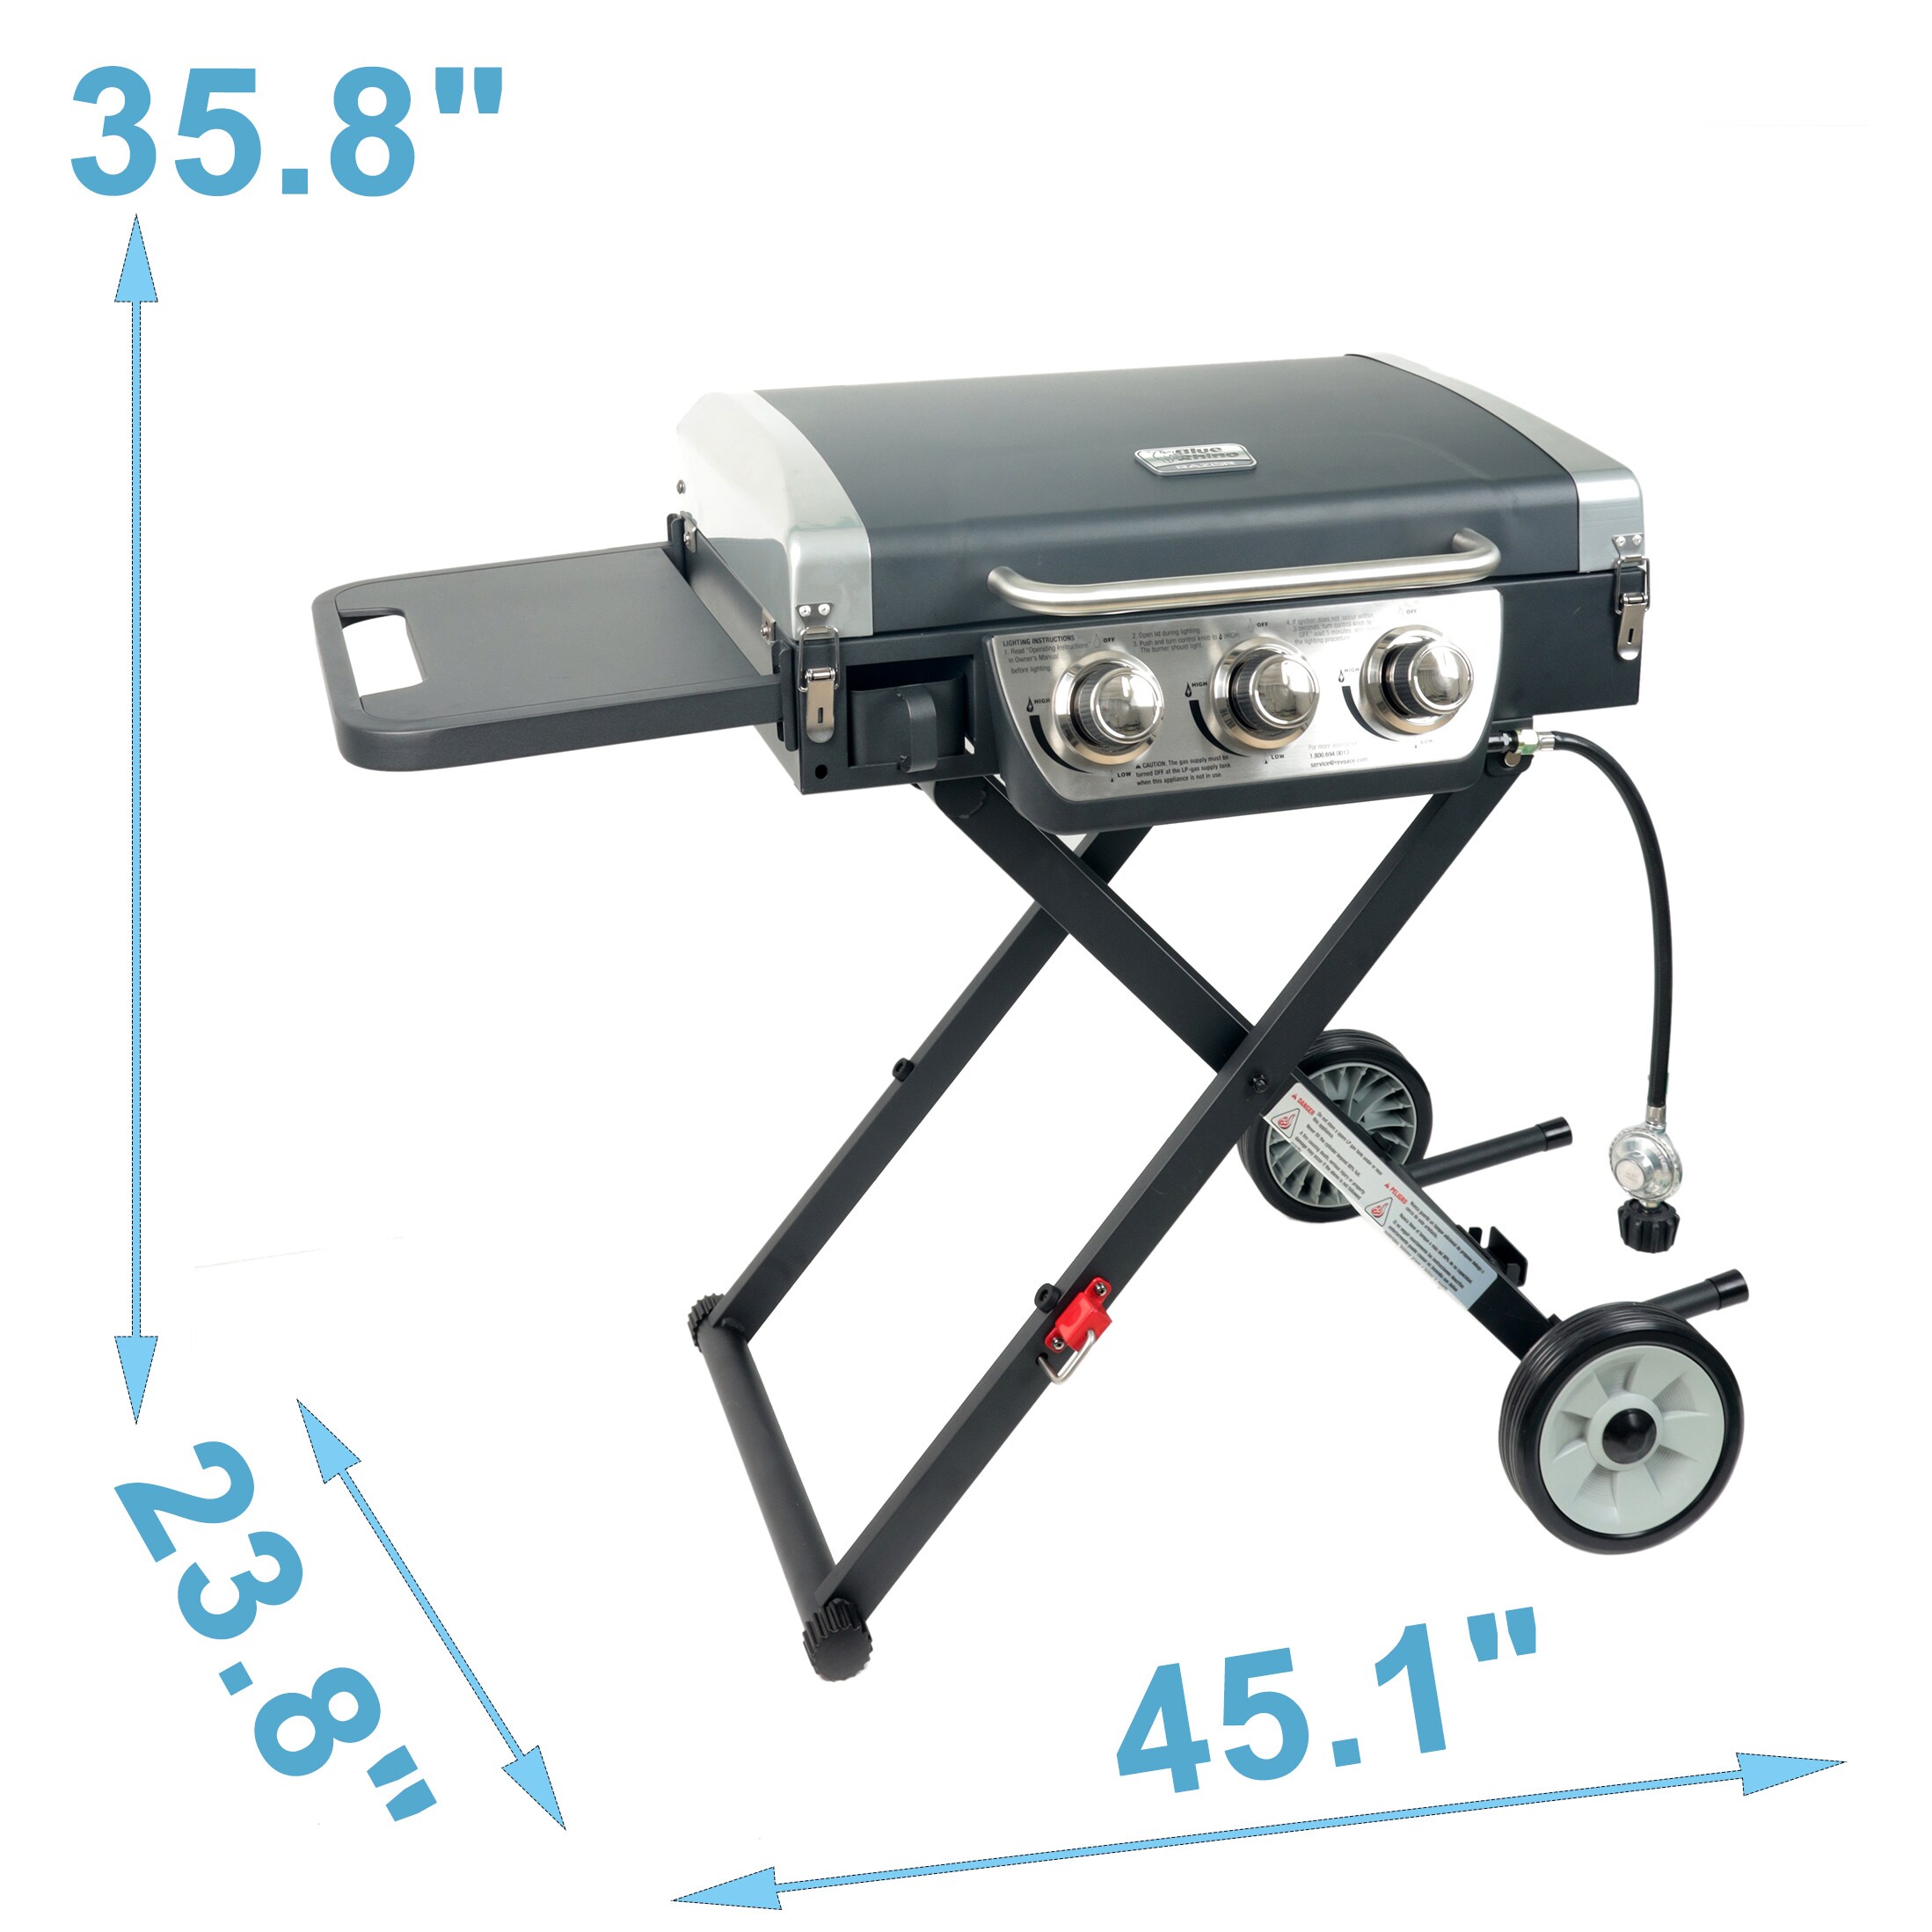 MFSTUDIO Portable Table Top Gas Griddle, 3 Burners Ceramic Flat Top Propane  BBQ Grill for Outdoor Camping, Kitchen, Tailgating, 24000 BTU, 375 sq. in.